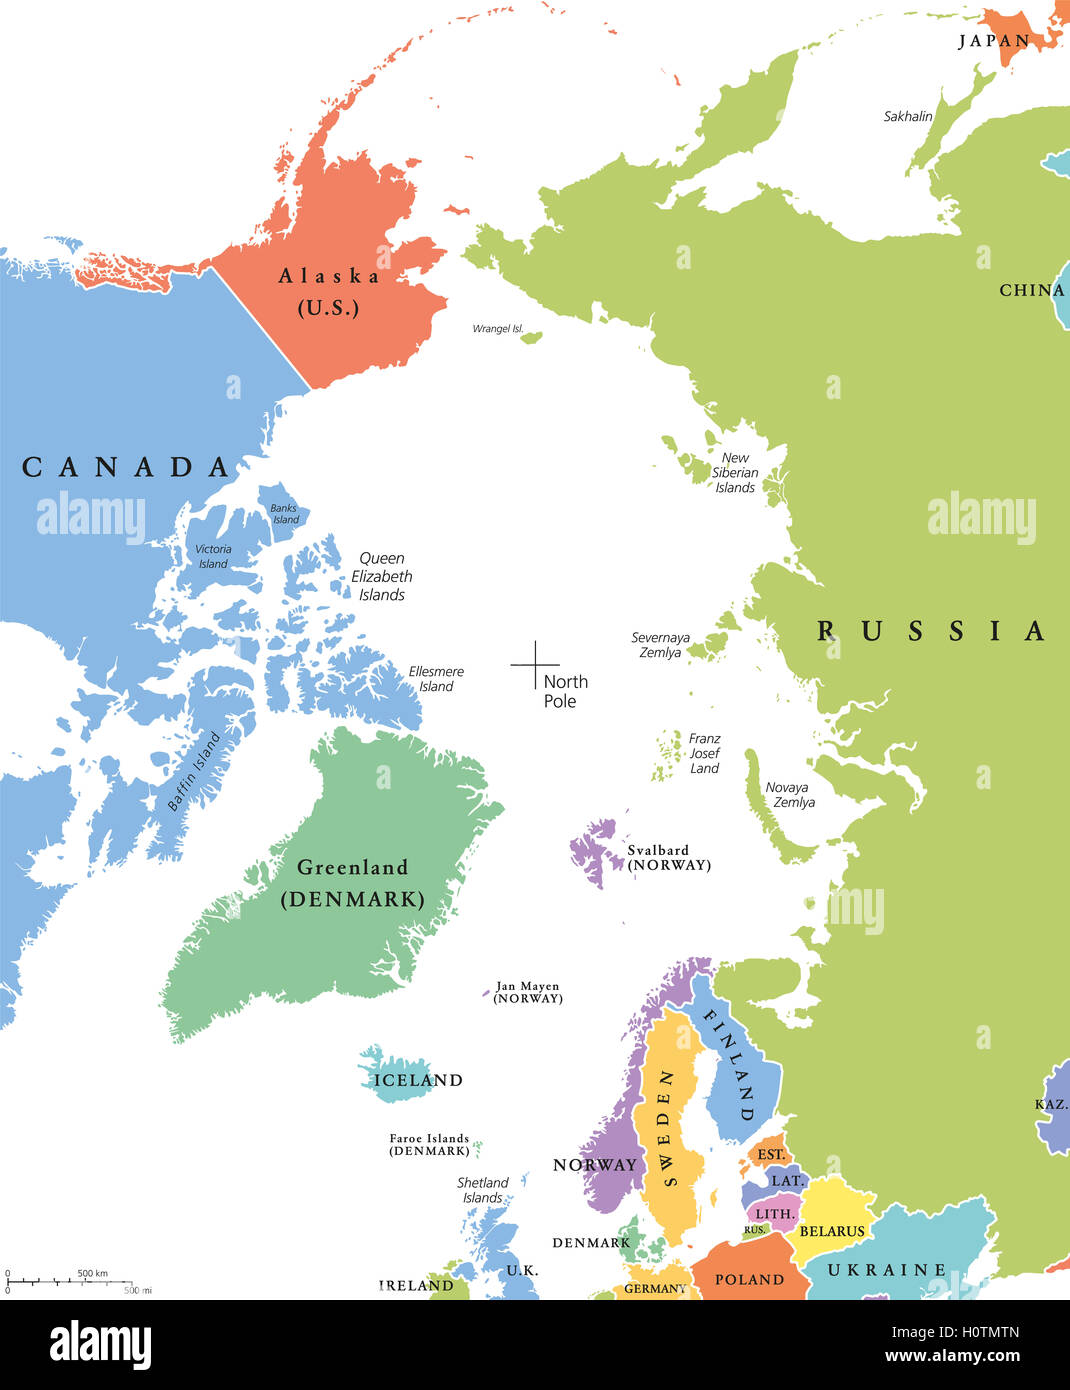 Arctic region single states and North Pole political map. Nations in different colors, with national borders and country names. Stock Photo